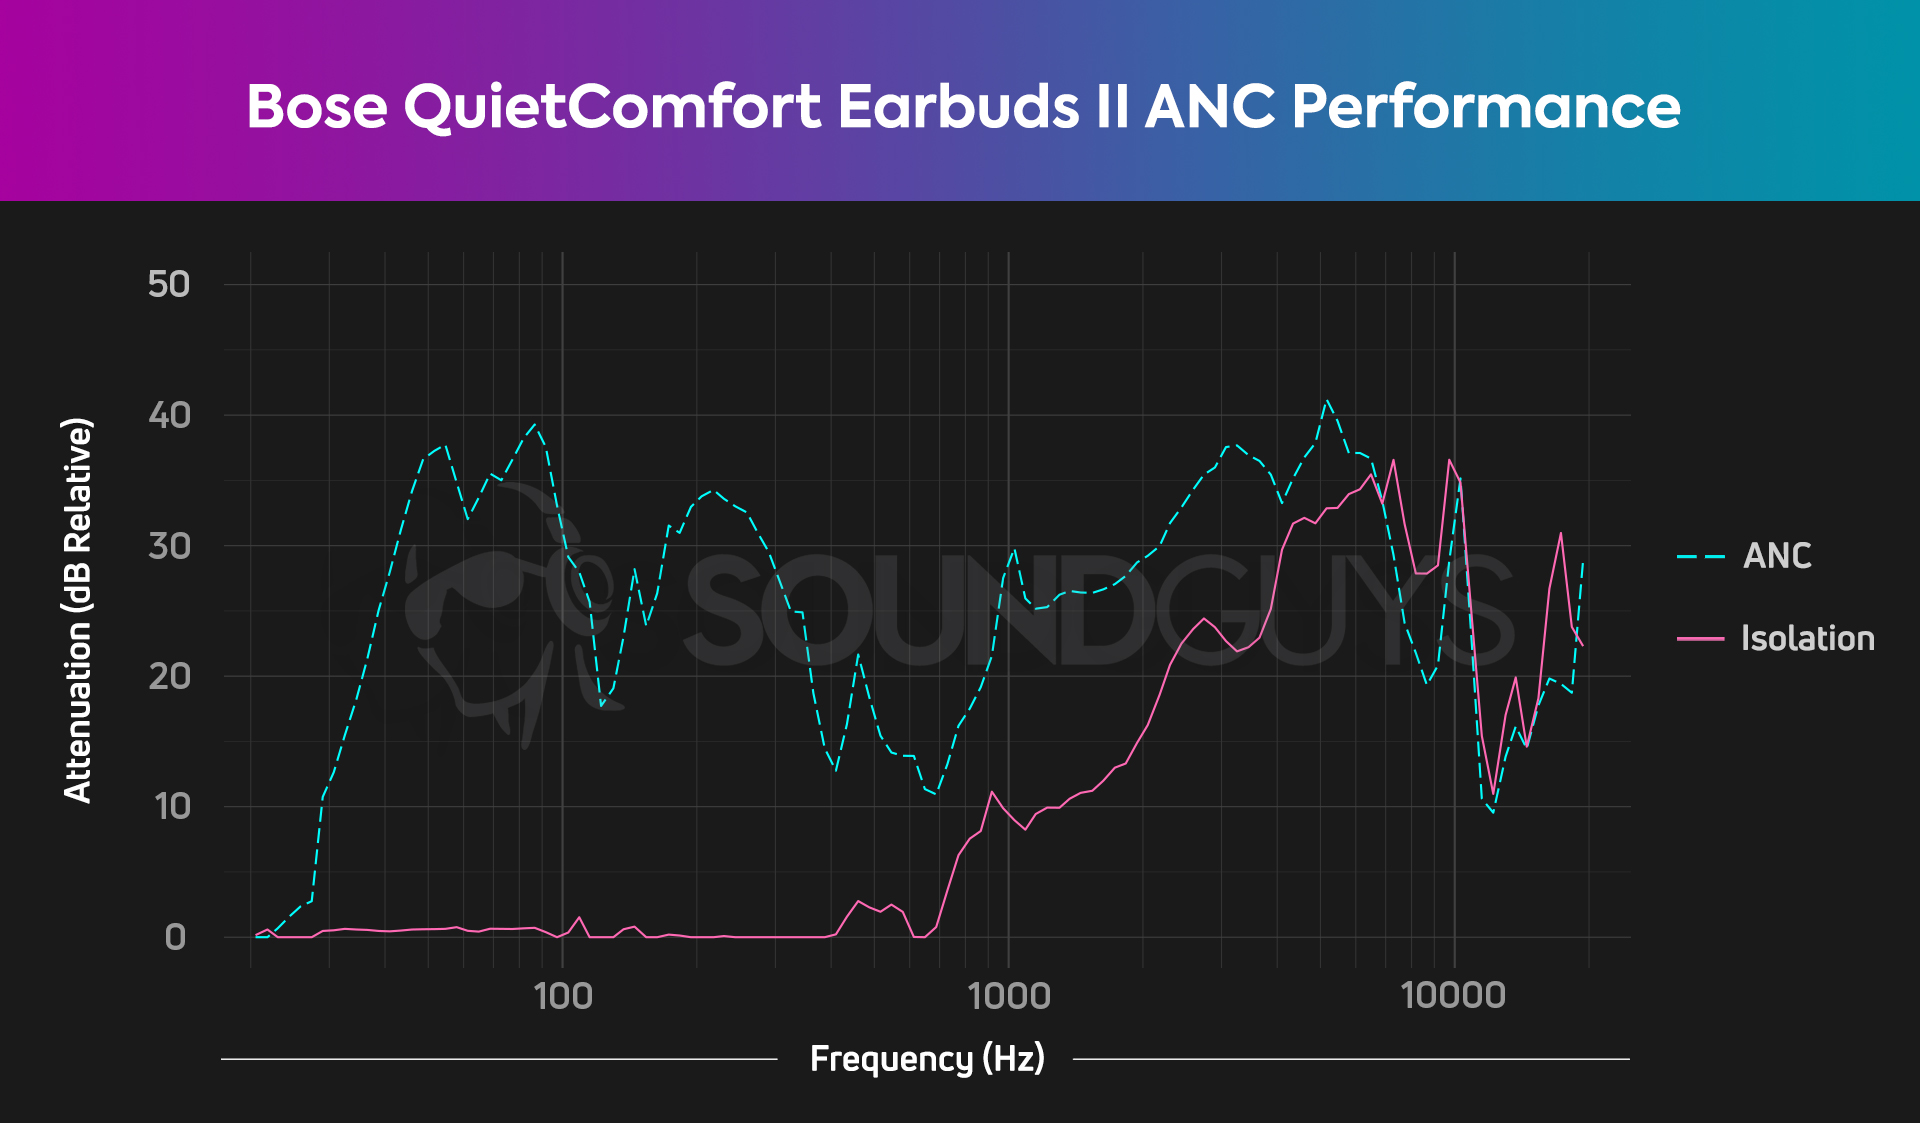 A chart depicts the Bose QuietComfort Earbuds II noise canceling performance and isolation.